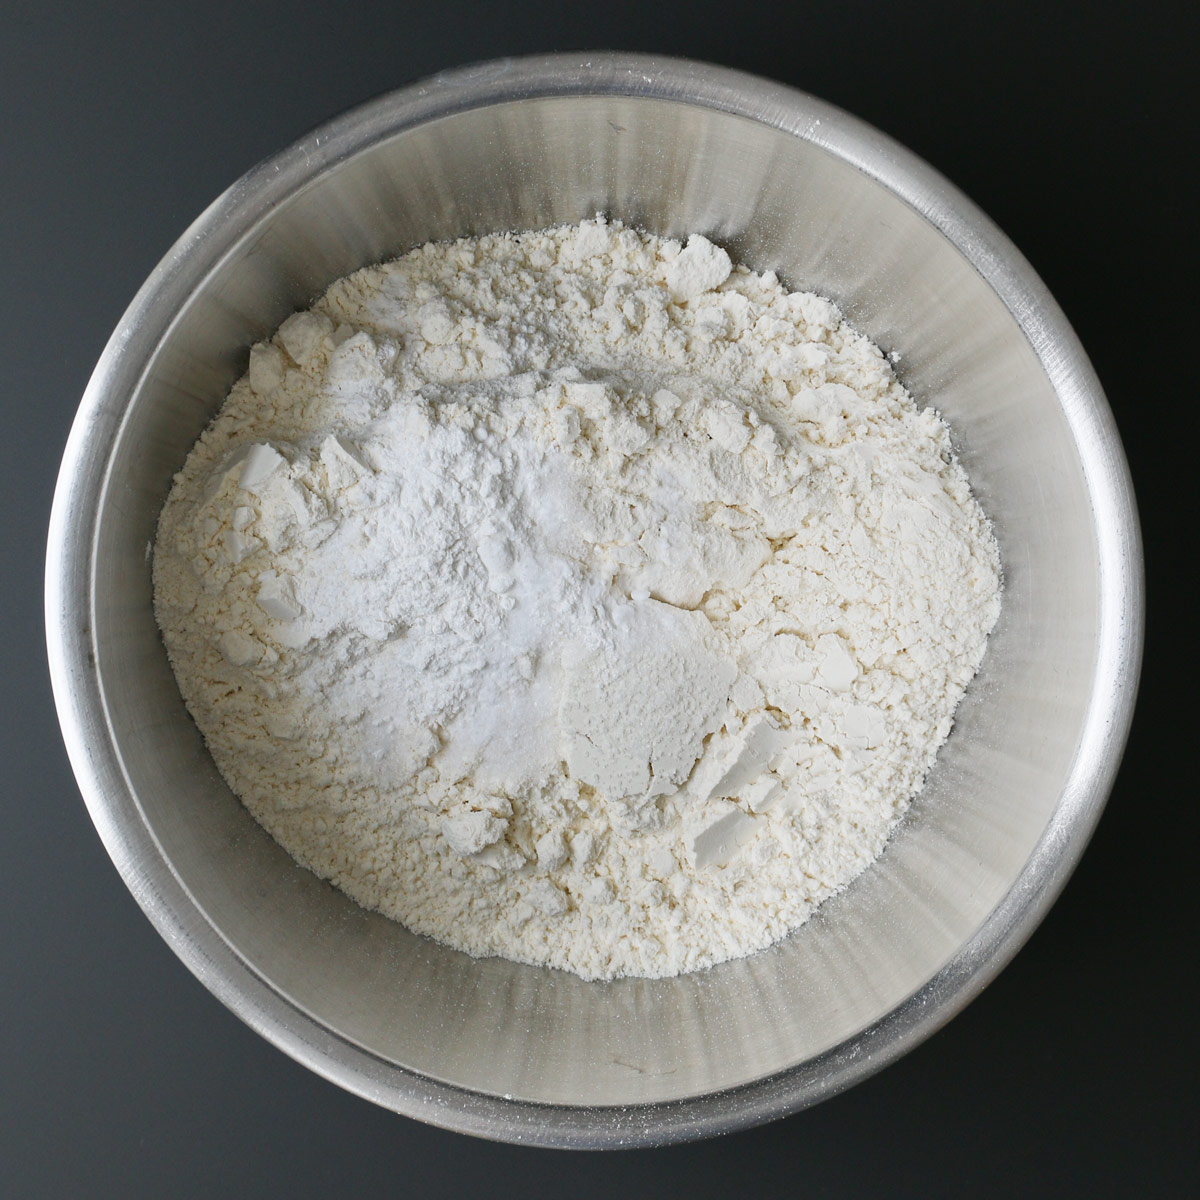 dry ingredients placed in a mixing bowl.